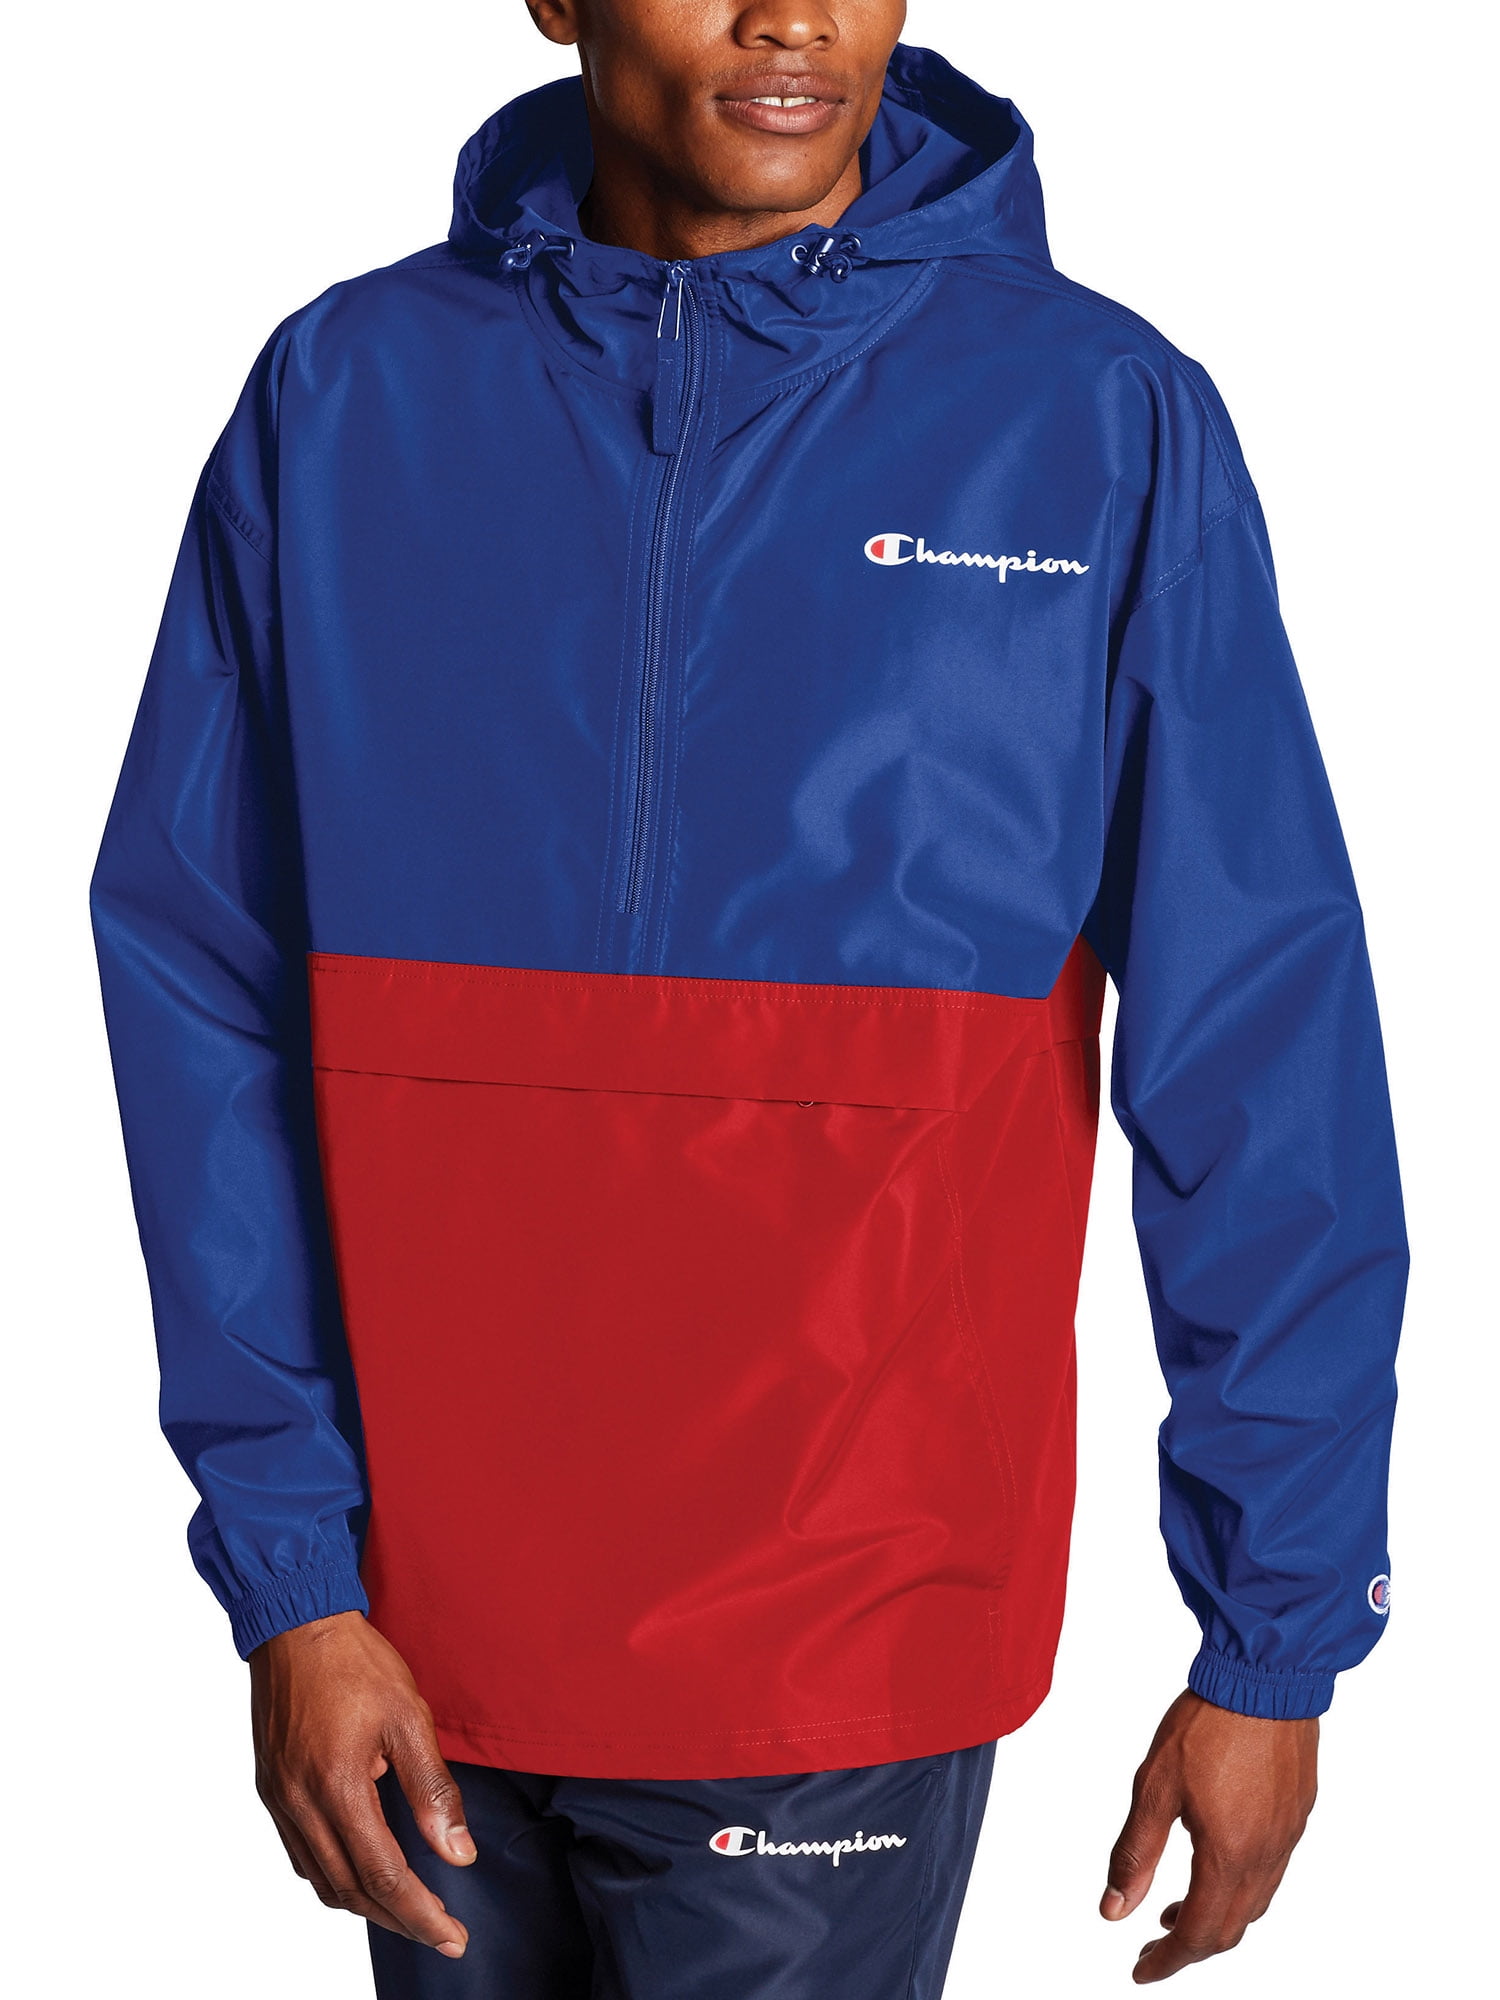 Champion Mens Big and Tall Packable Lightweight Anorak Jacket : Amazon.ca:  Clothing, Shoes & Accessories